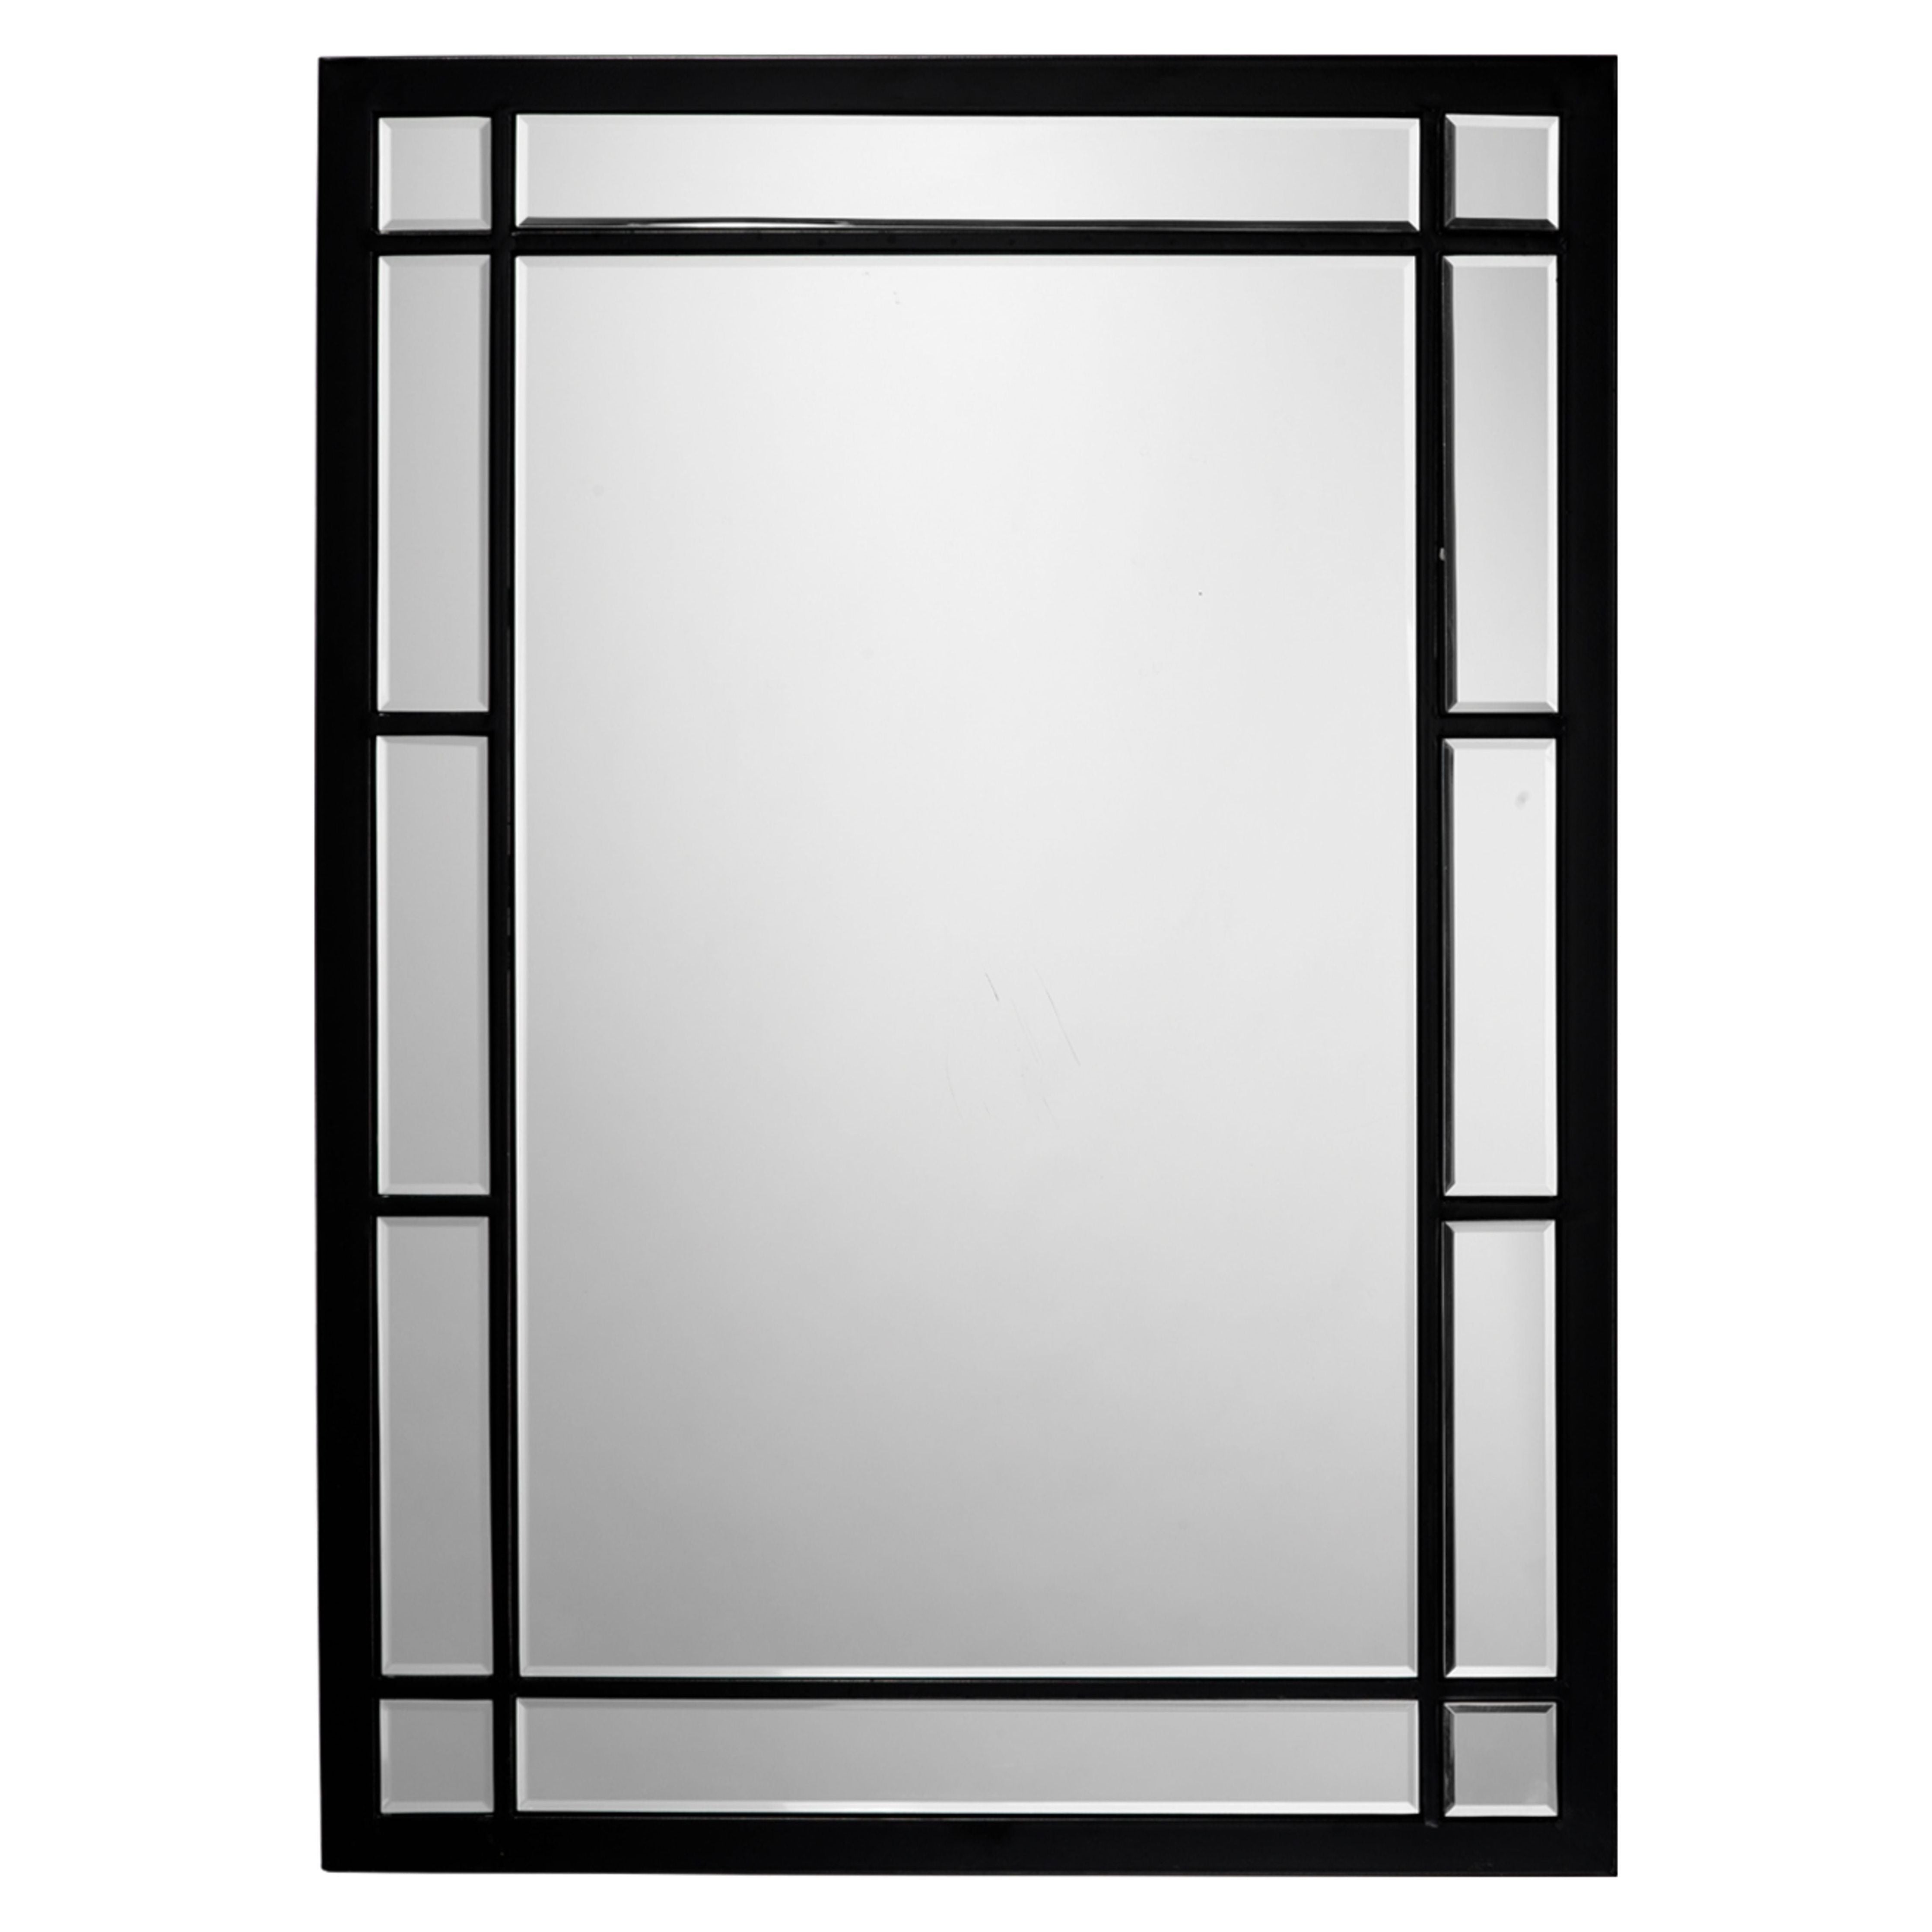 Jamie Young Company - BL72415-M2 - Chelsea Mirror - Chelsea - Black